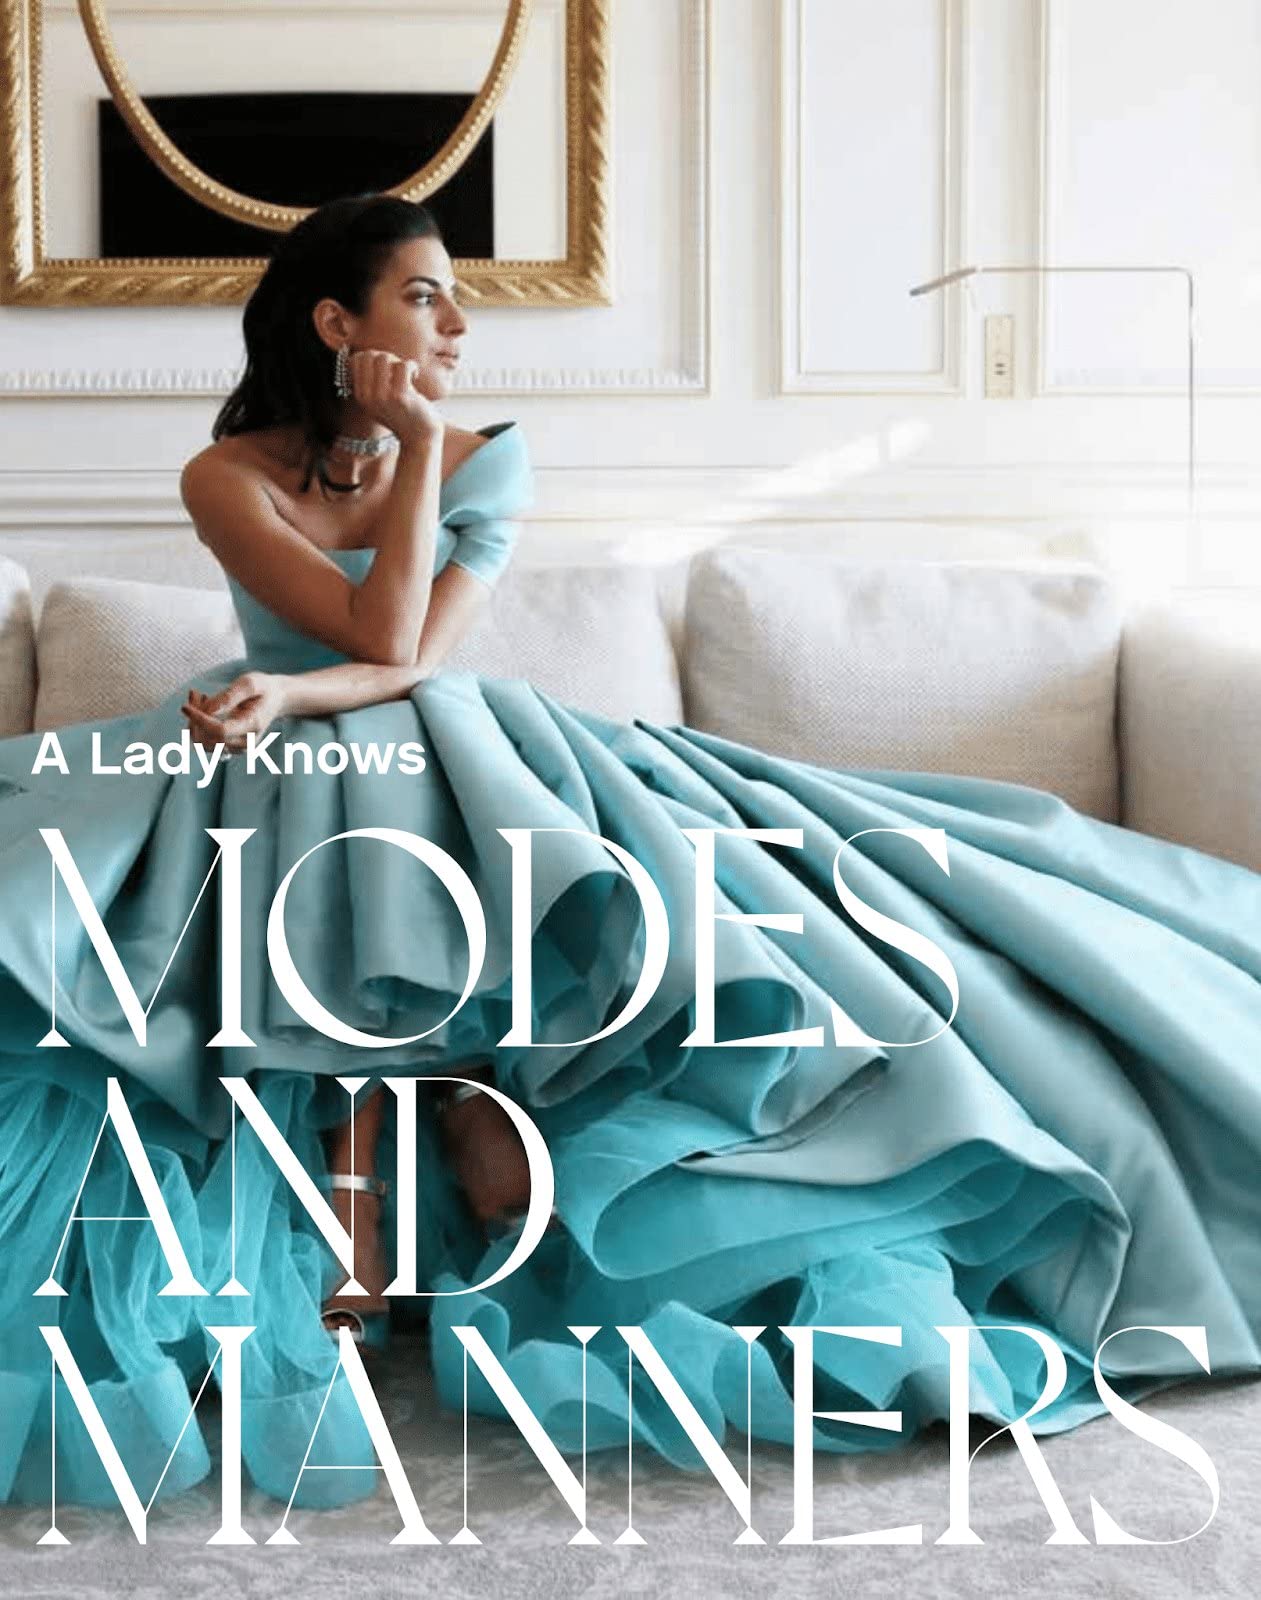 A Lady Knows: Modes & Manners